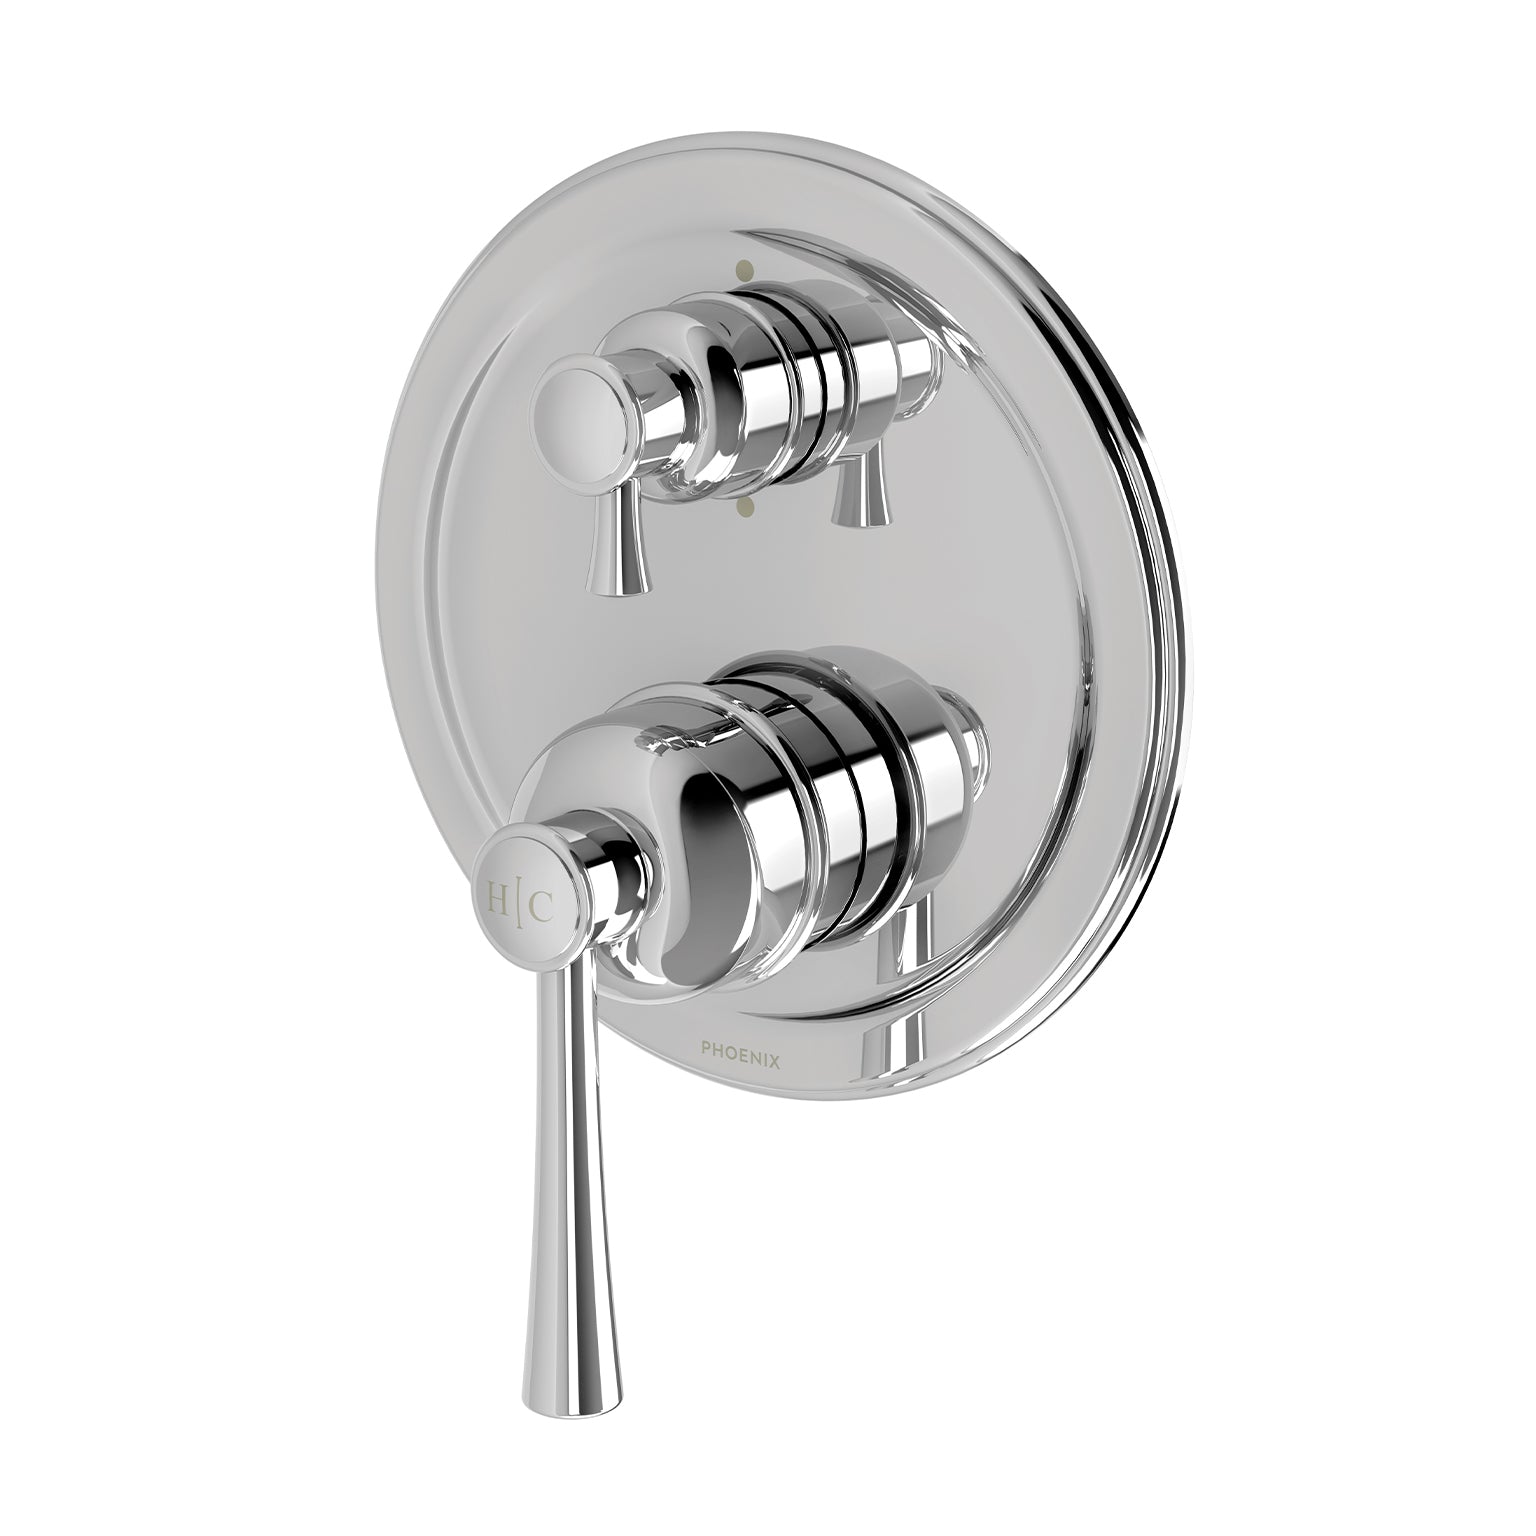 PHOENIX CROMFORD SWITCHMIX SHOWER / BATH DIVERTER MIXER FIT-OFF AND ROUGH-IN KIT CHROME